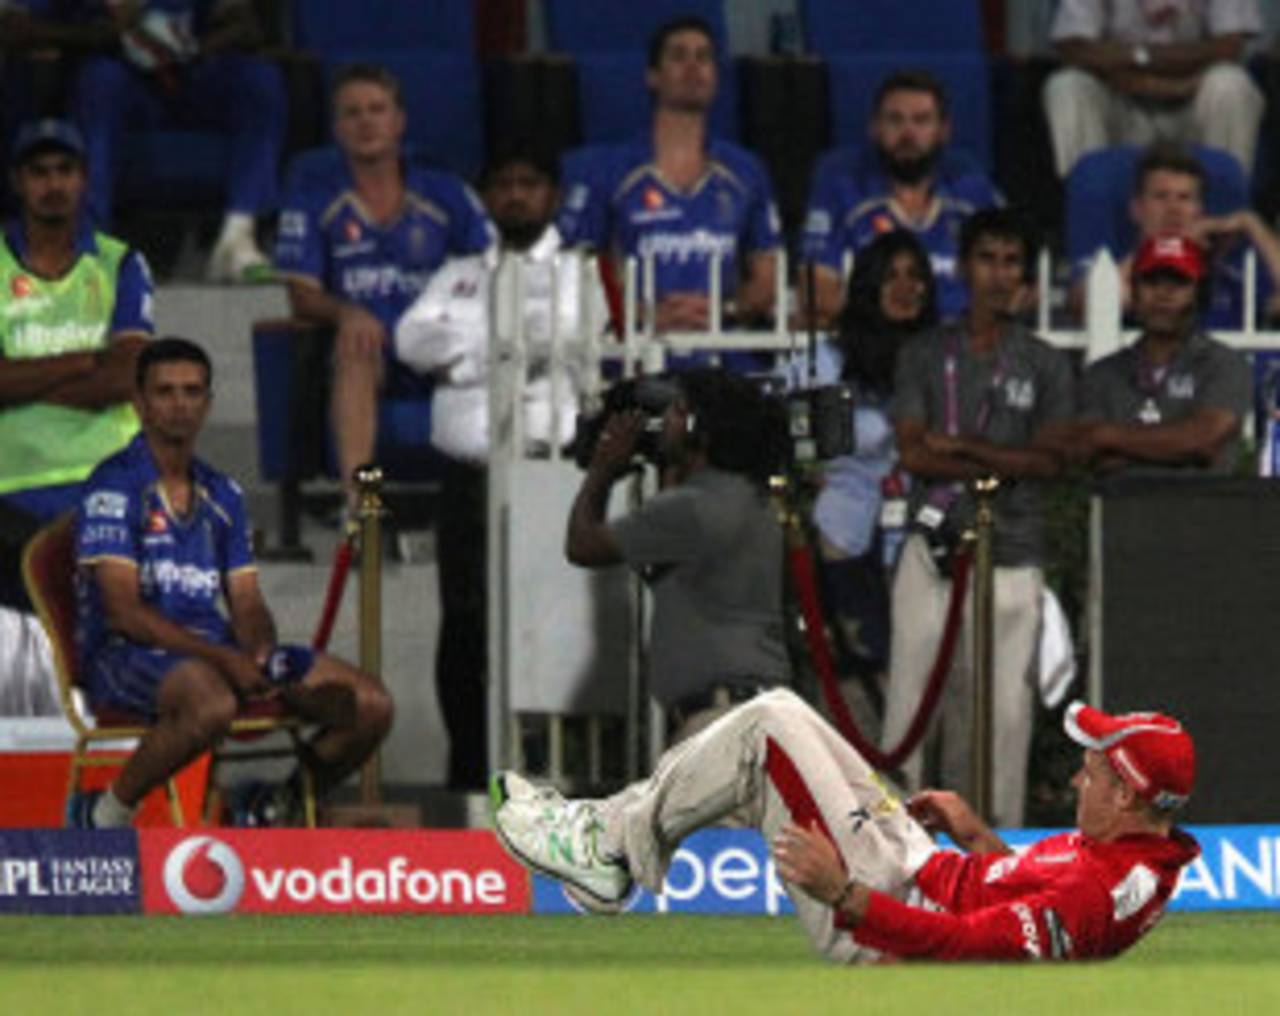 The ball is wedged between David Miller's legs after the ball slipped through his fingers, Rajasthan Royals v Kings XI Punjab, IPL 2014, Sharjah, April 20, 2014